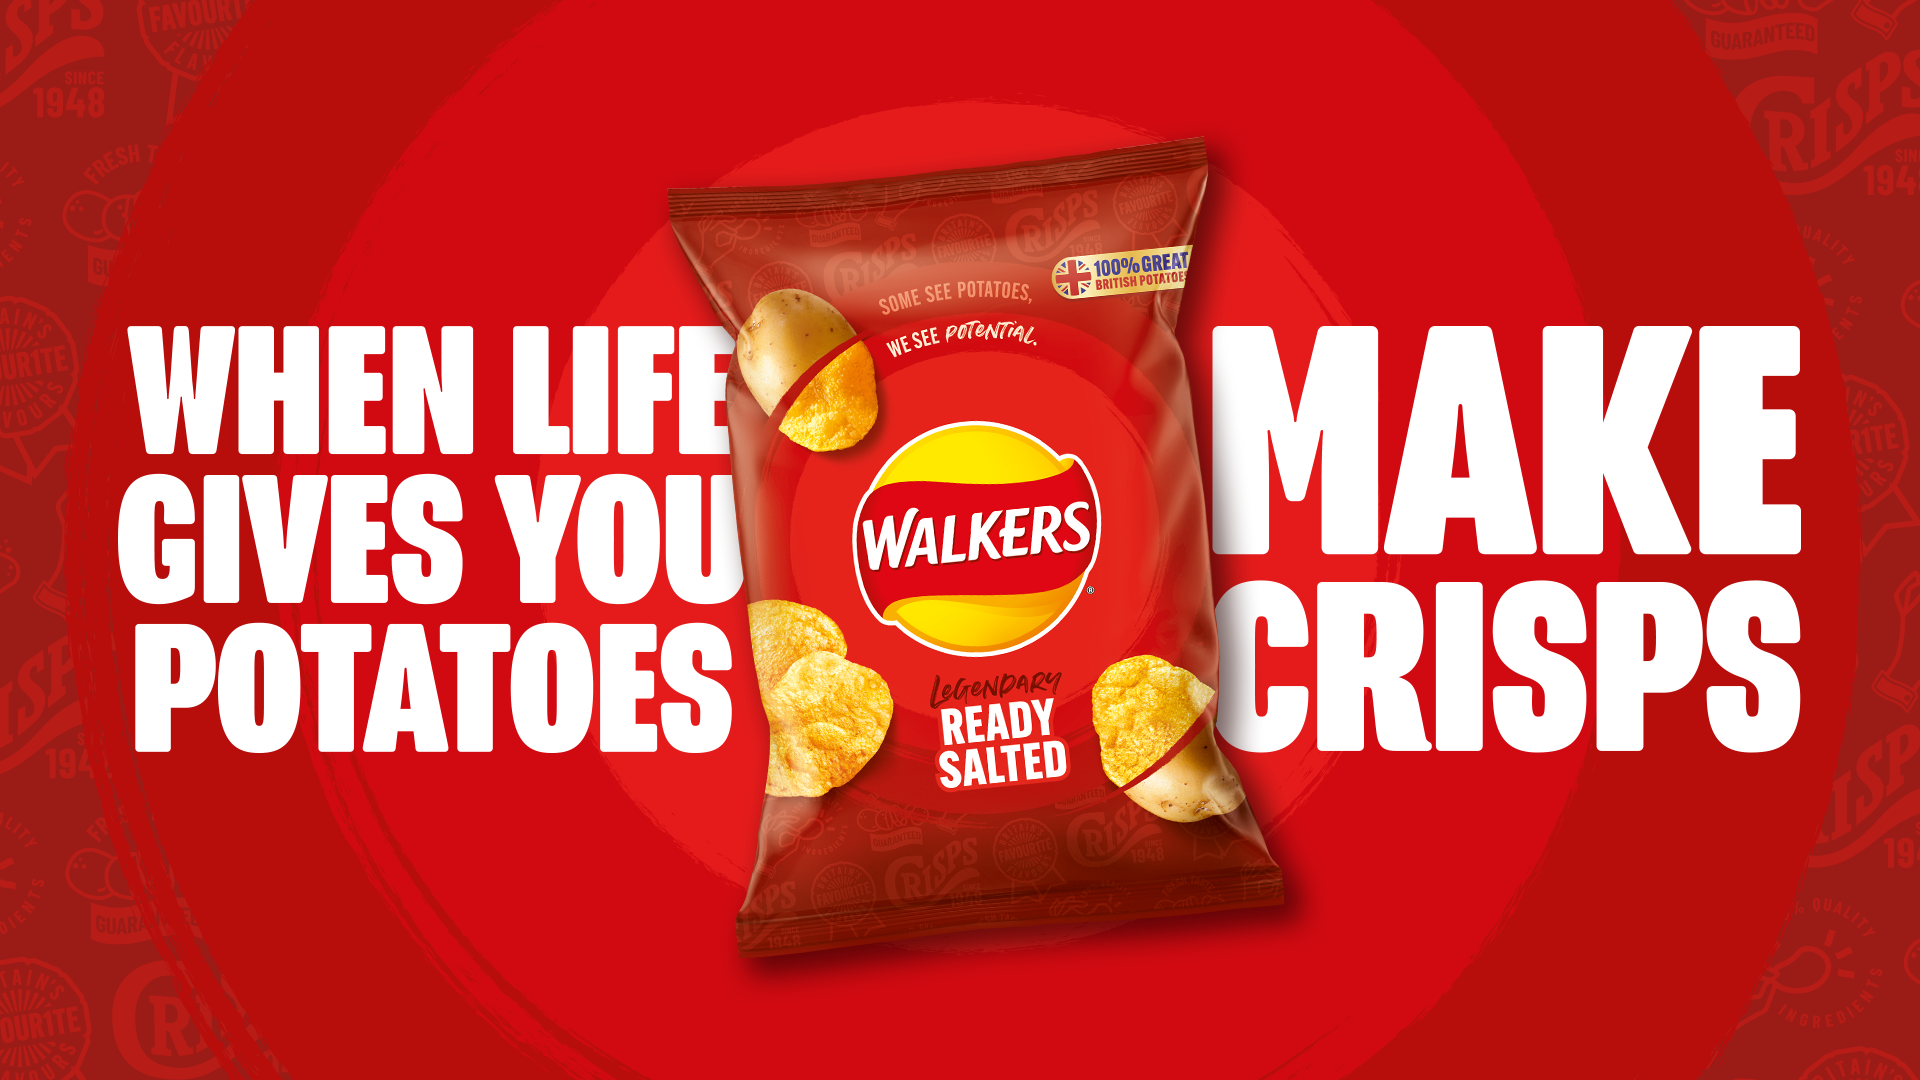 Walkers rolls out a brand-new look, campaign